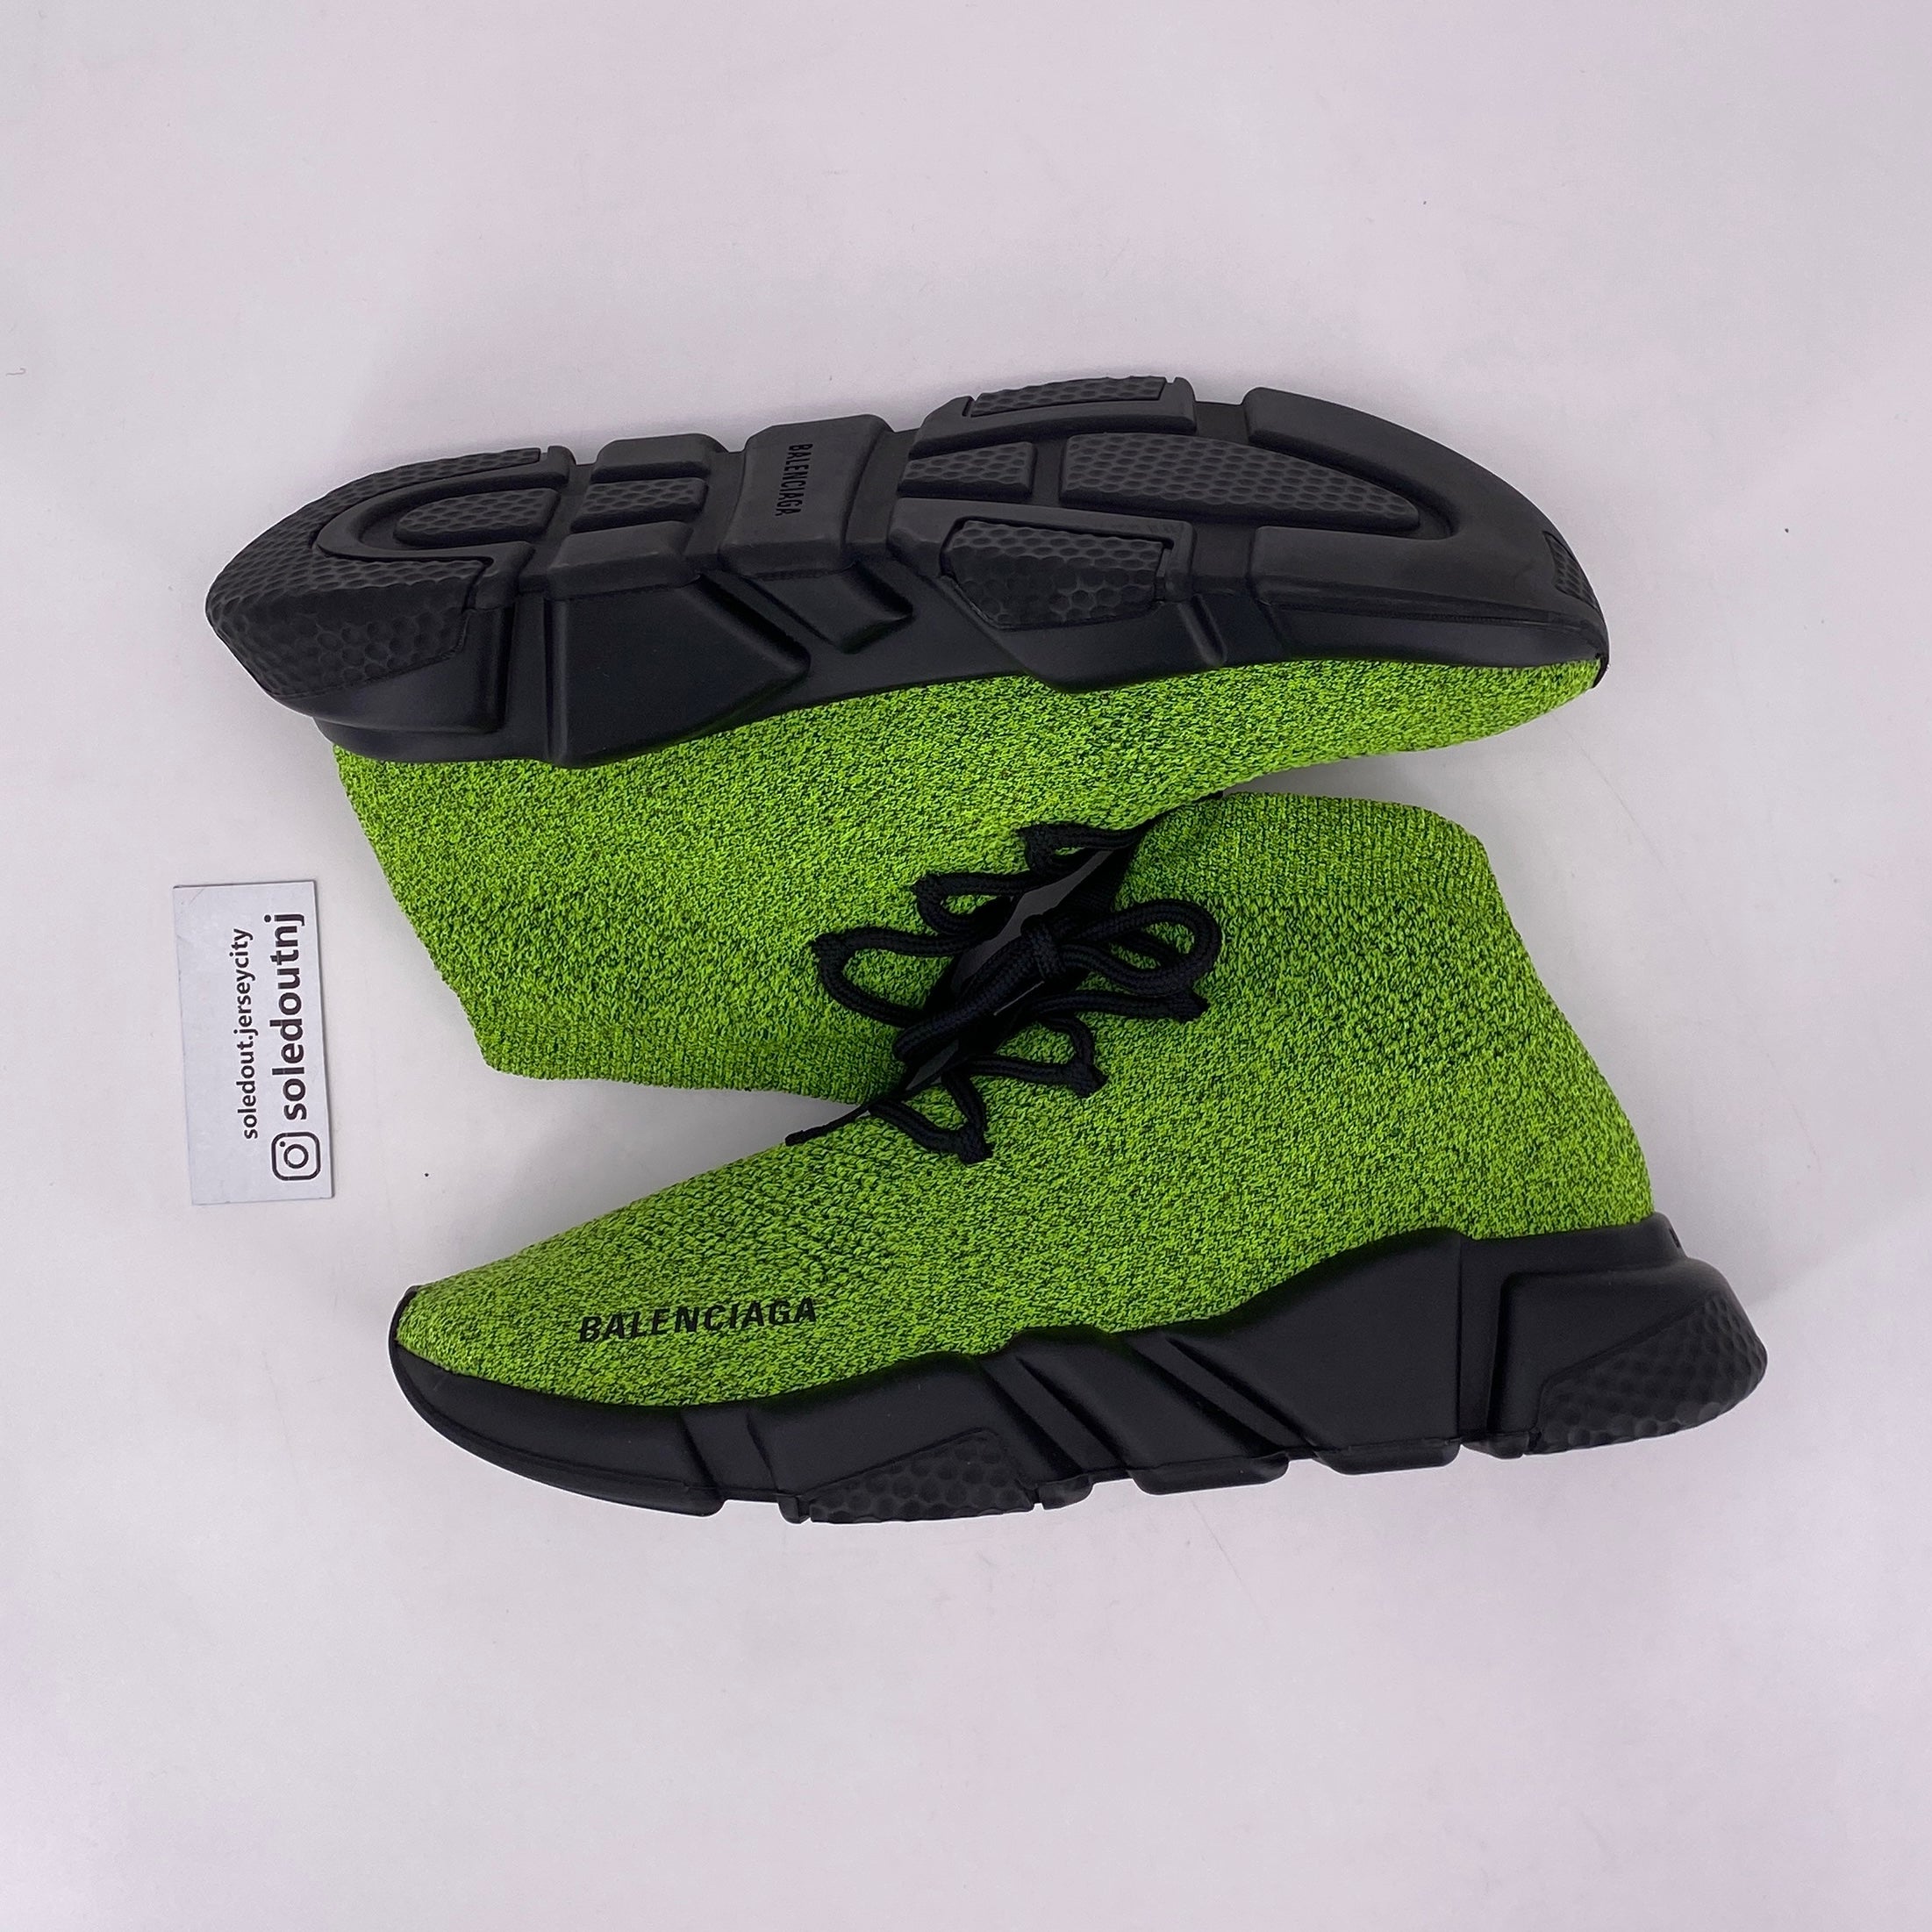 Balenciaga Speed Trainer "Lace Up"  New Size 41